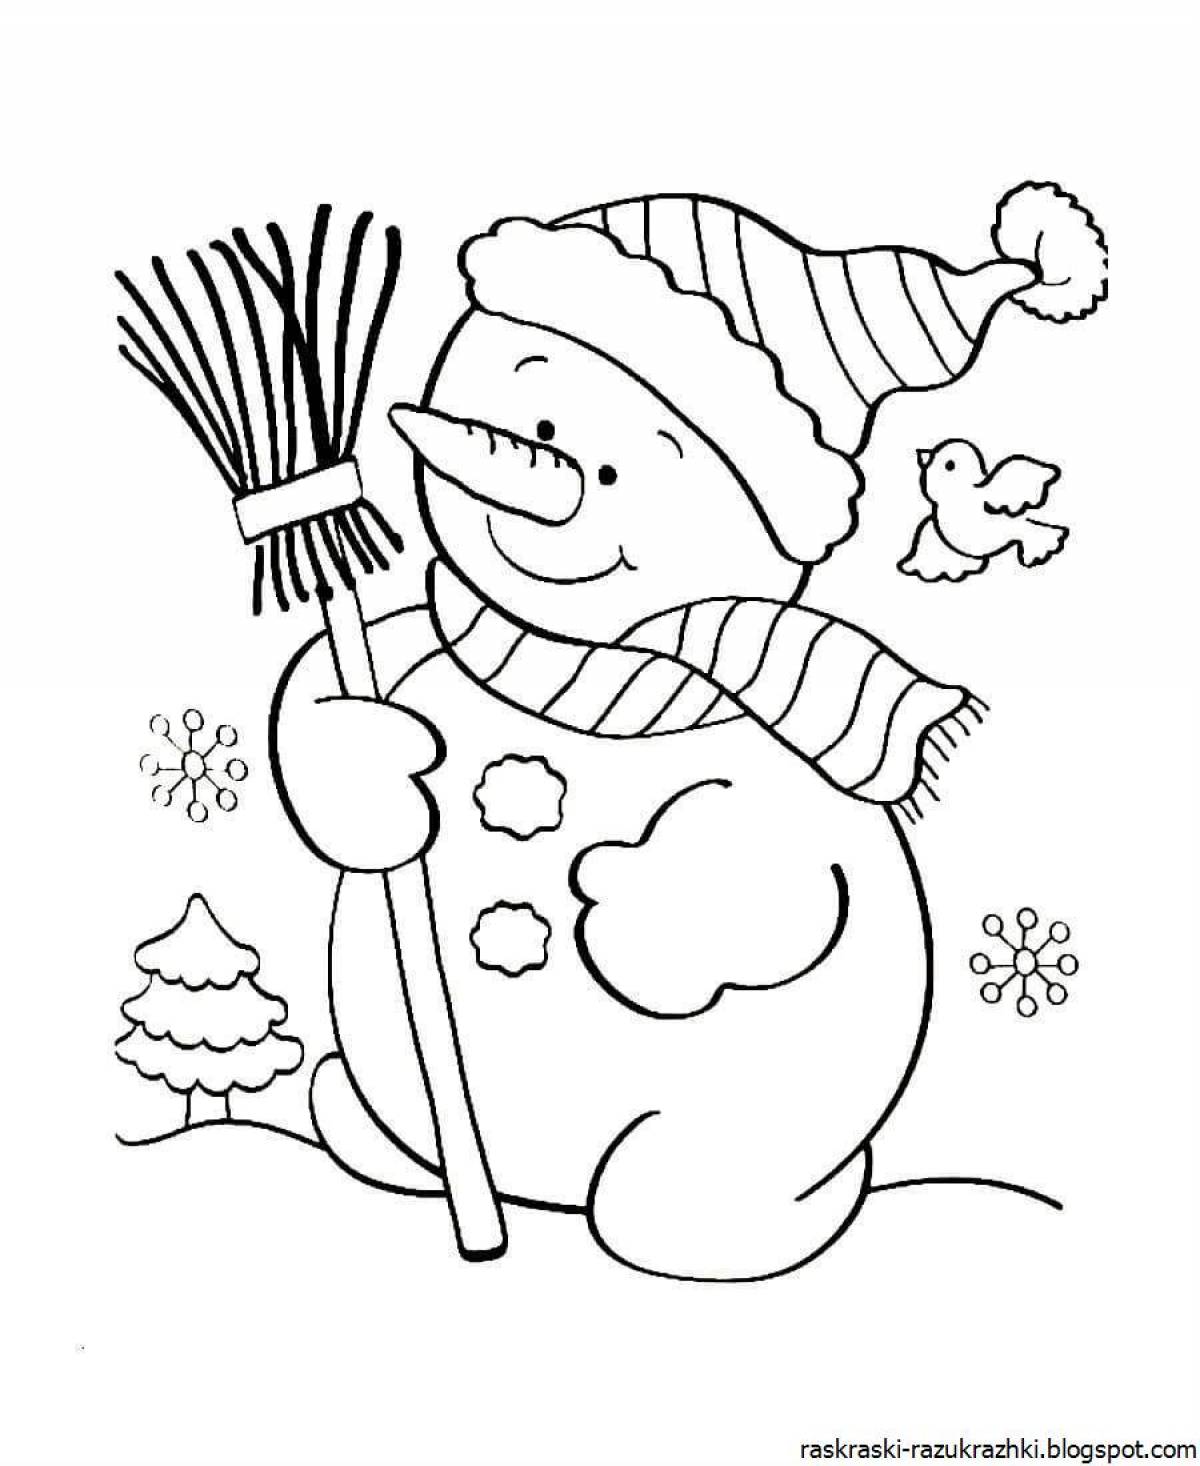 Smiling snowman coloring page for kids